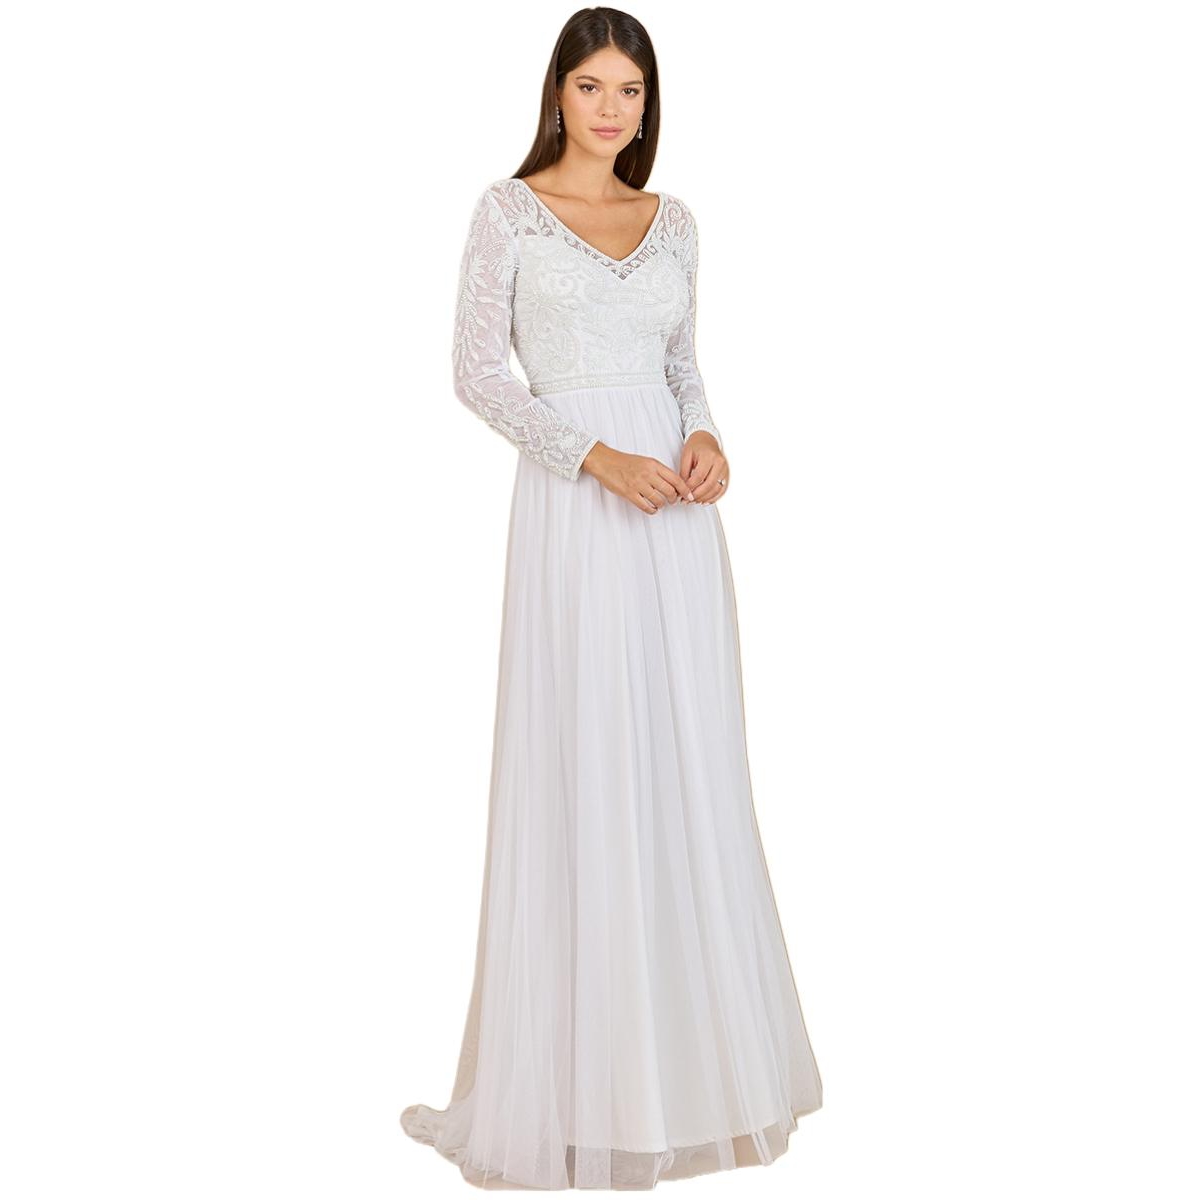 Women's Long Sleeve Bridal Gown with Flowy Skirt - Ivory